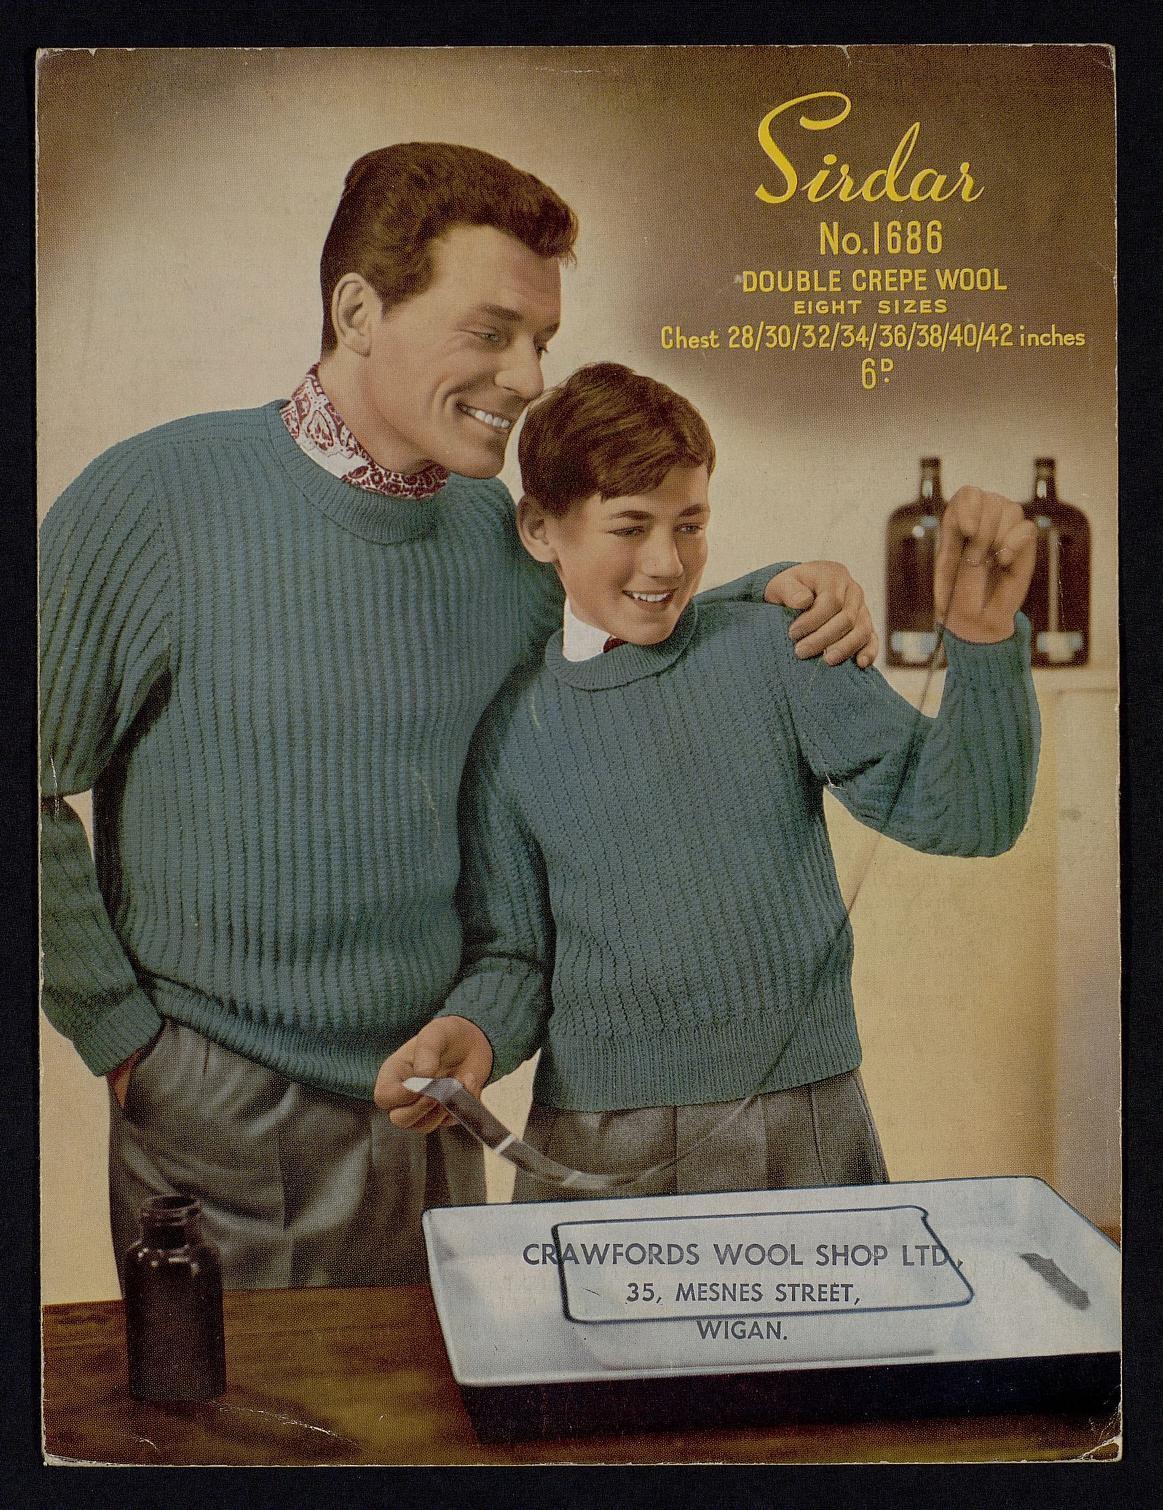 1950/60s Man's Sweater-hipster-vintage Knitting Pattern copia 